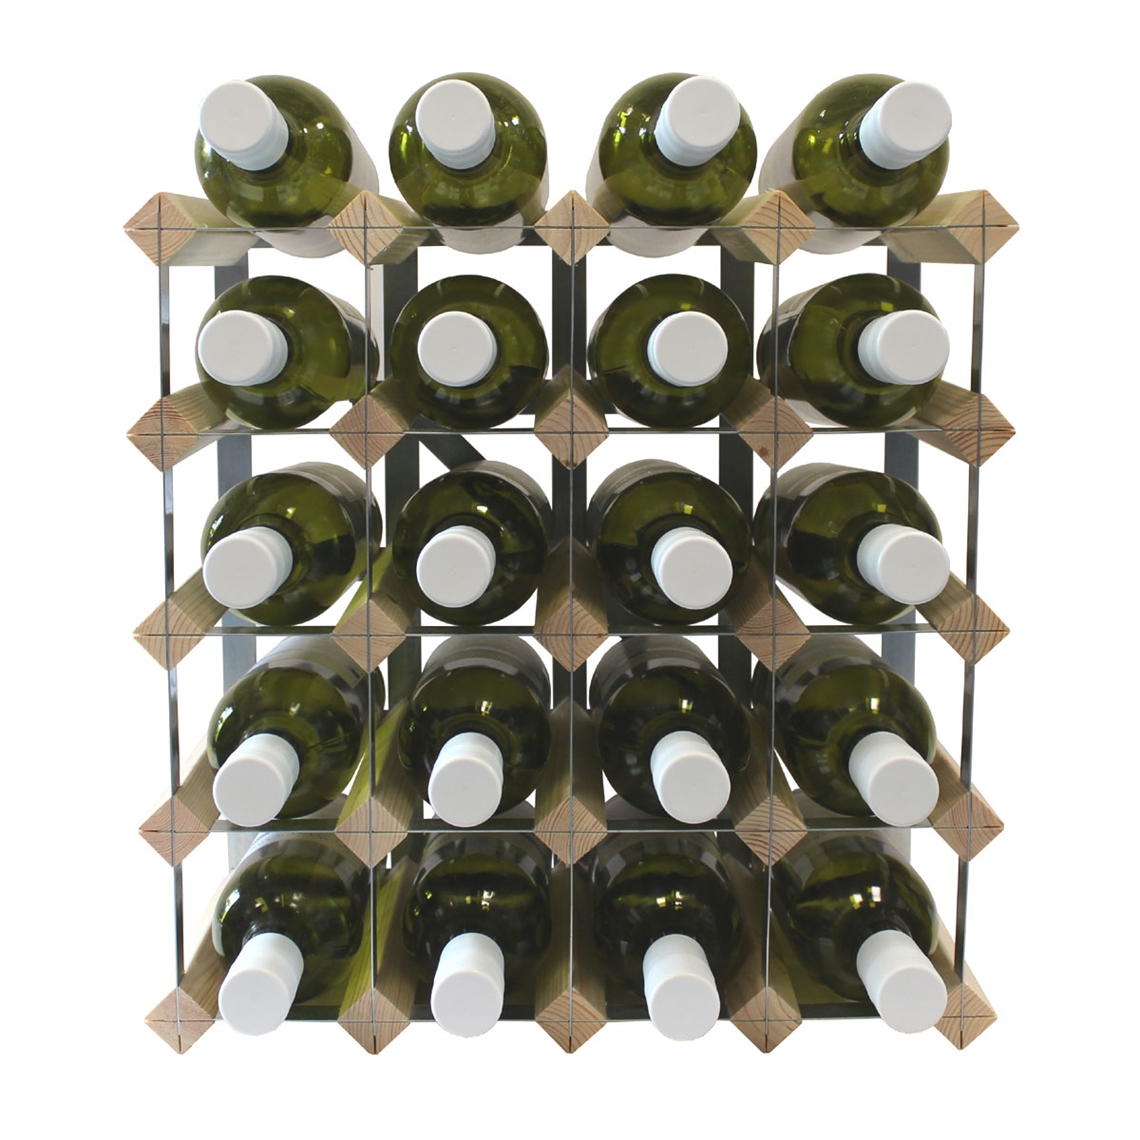 View more flat pack wine rack from our Assembled Wine Racks range